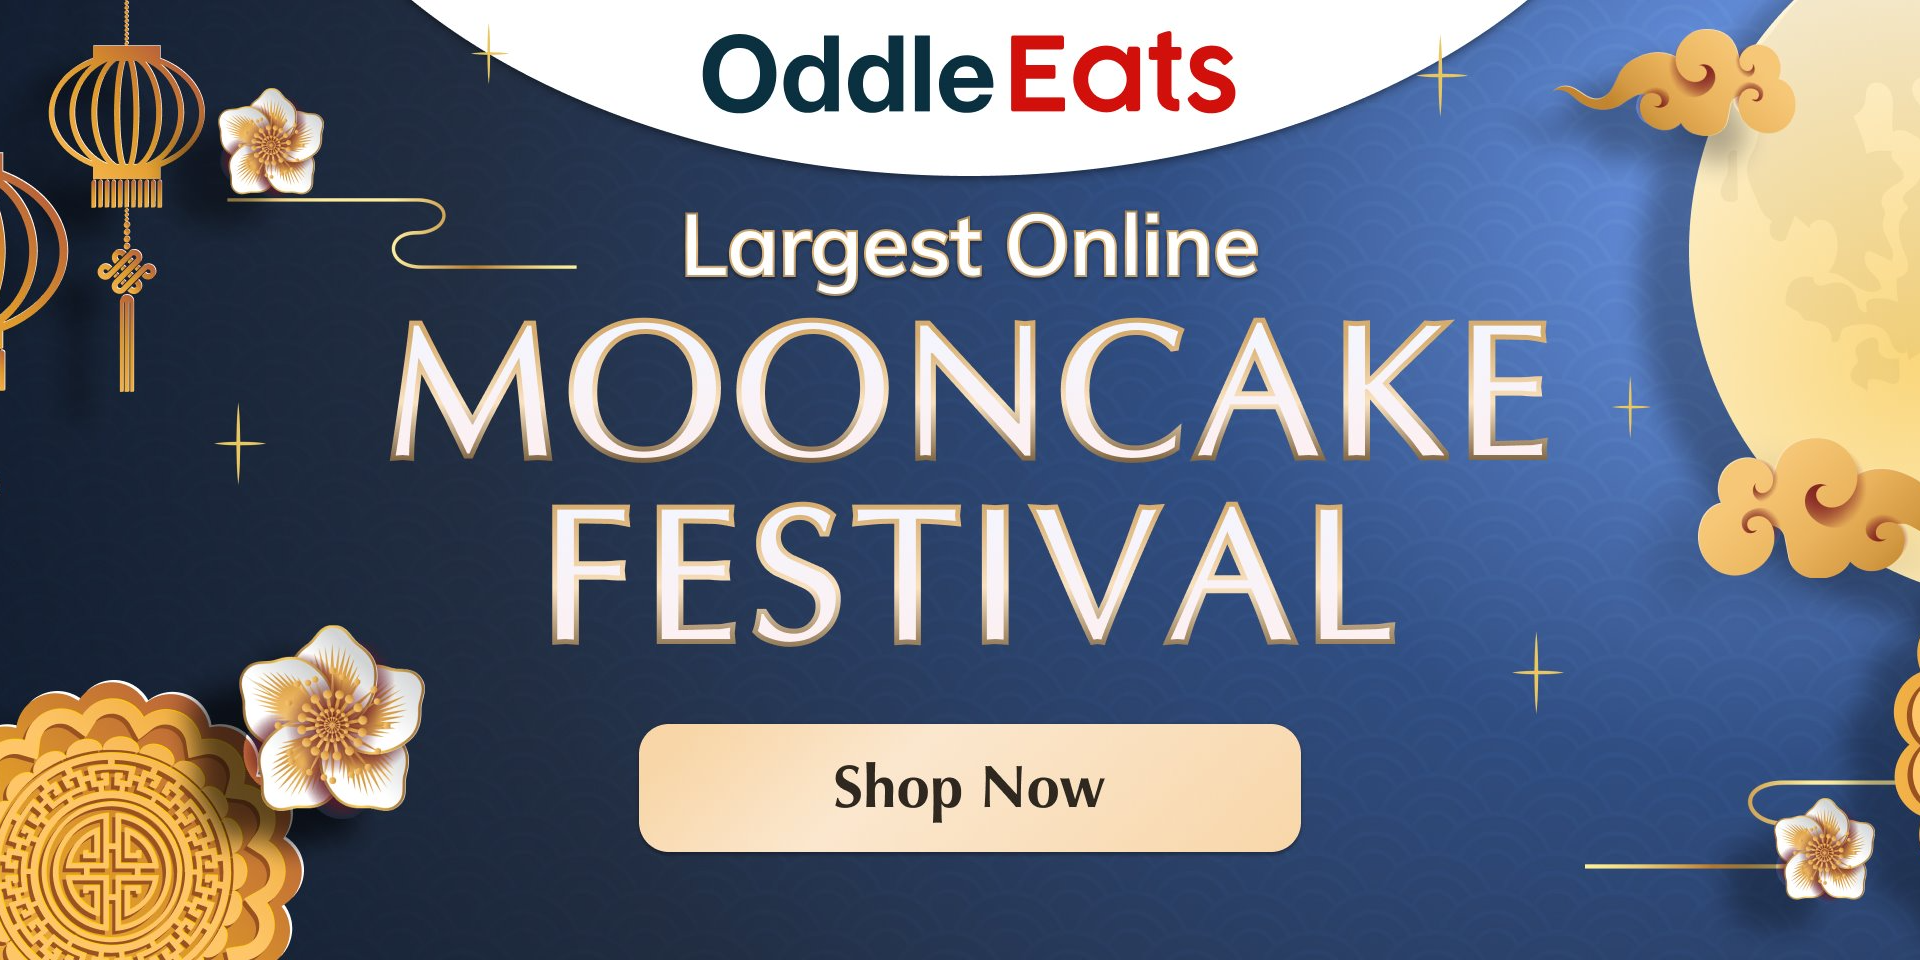 Check out Oddle Eats as they have the largest online mooncake festival in Singapore!